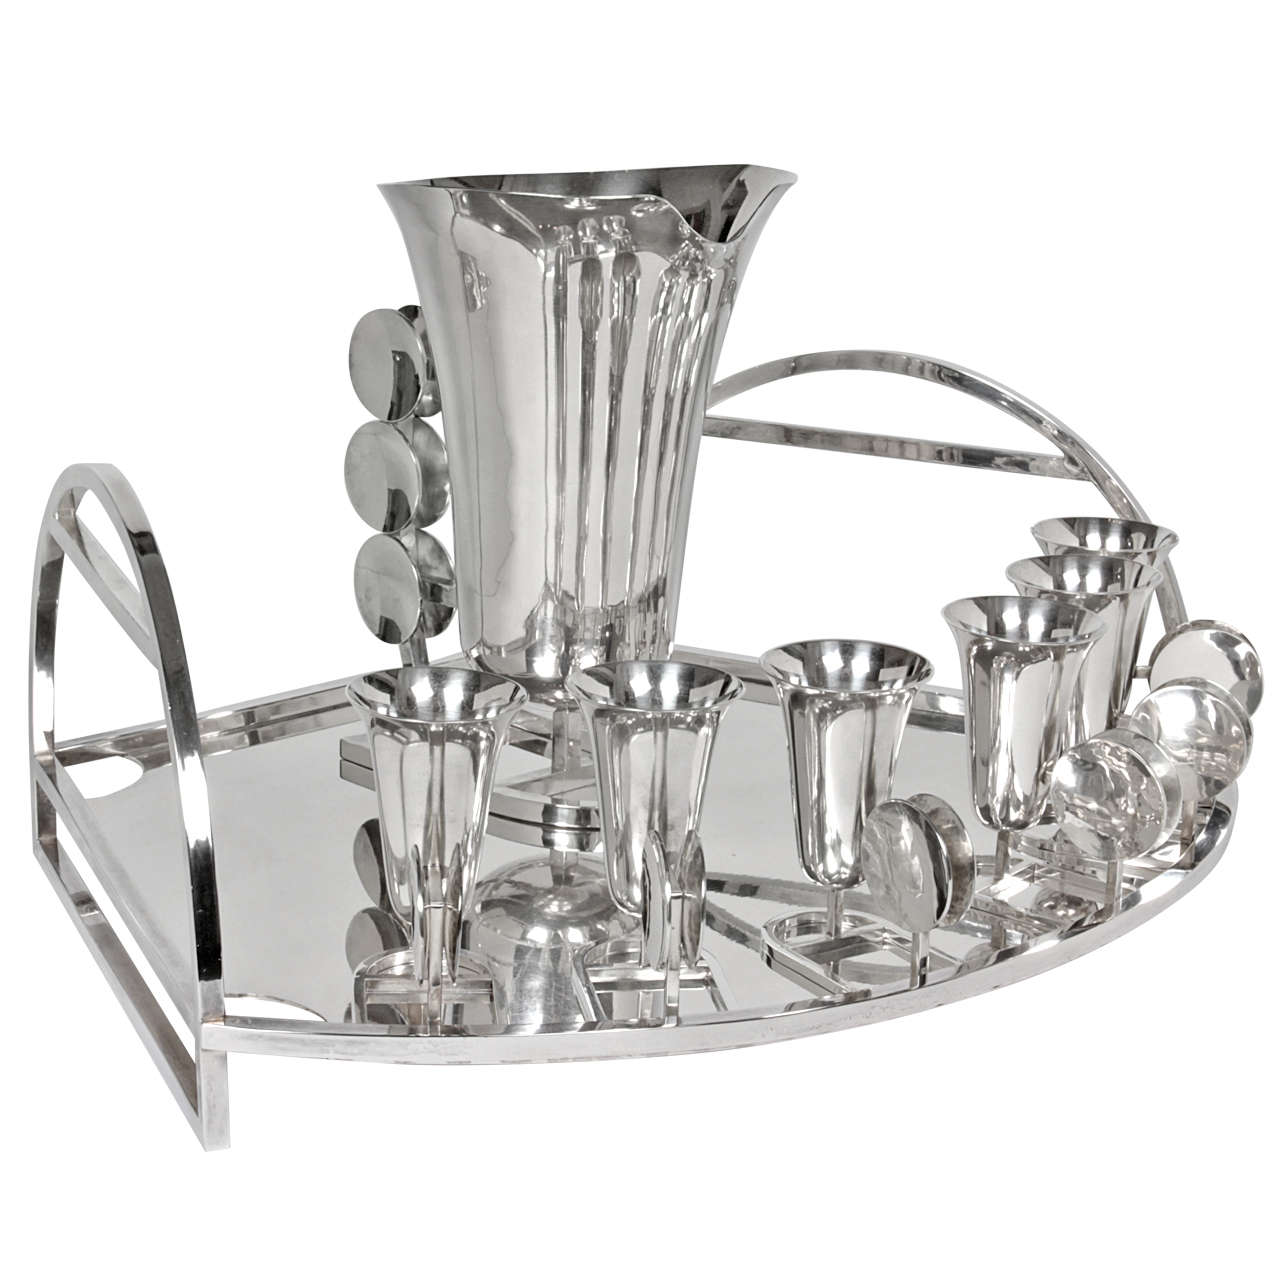 William Frederick Chicago Sterling Cocktail Drinks Set, circa 1945-1950 For Sale